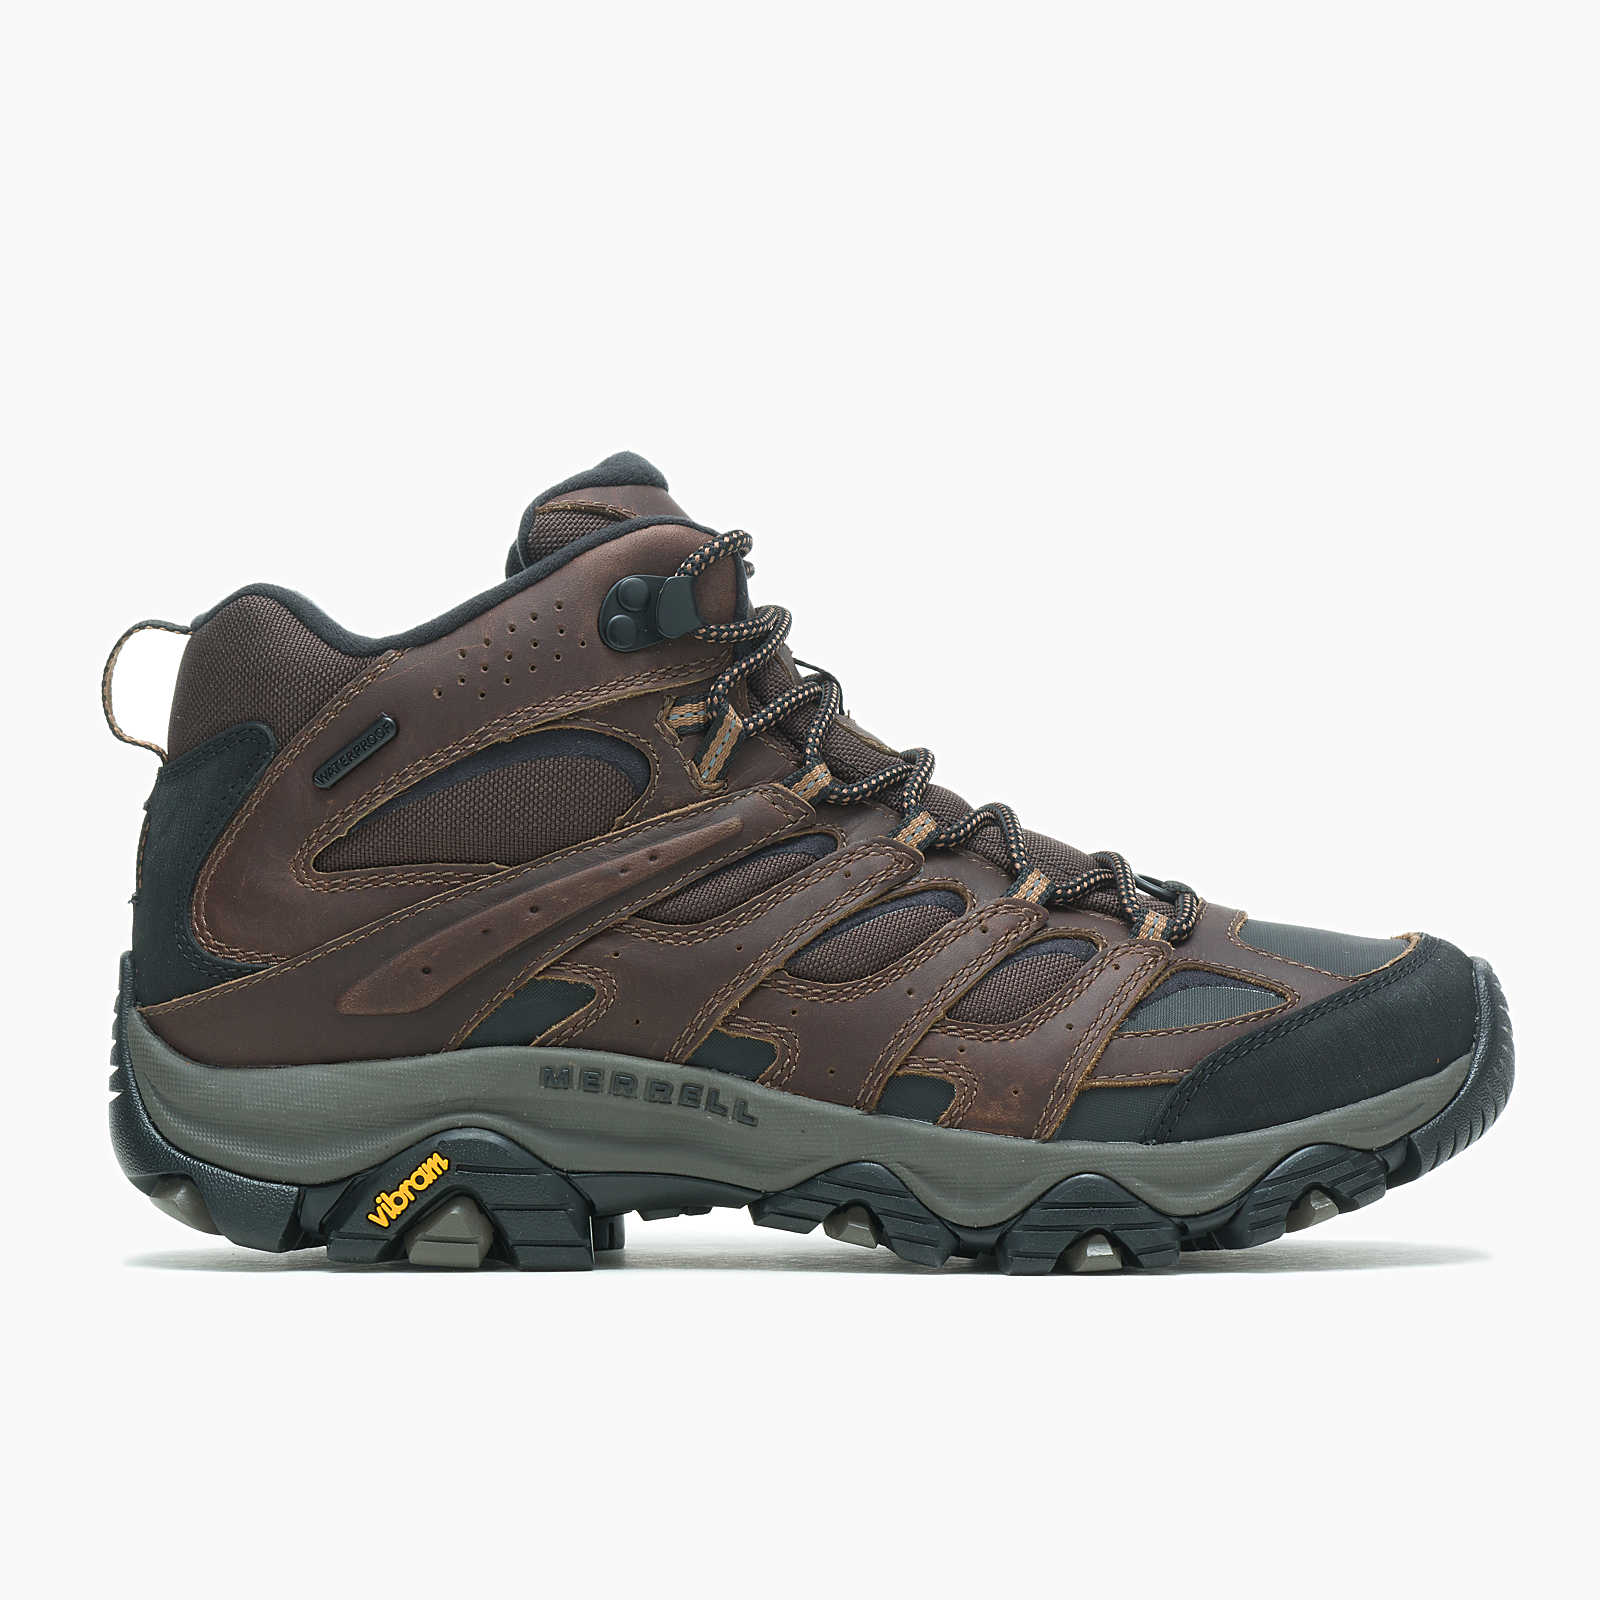 Moab 3 Thermo Mid Waterproof - Earth